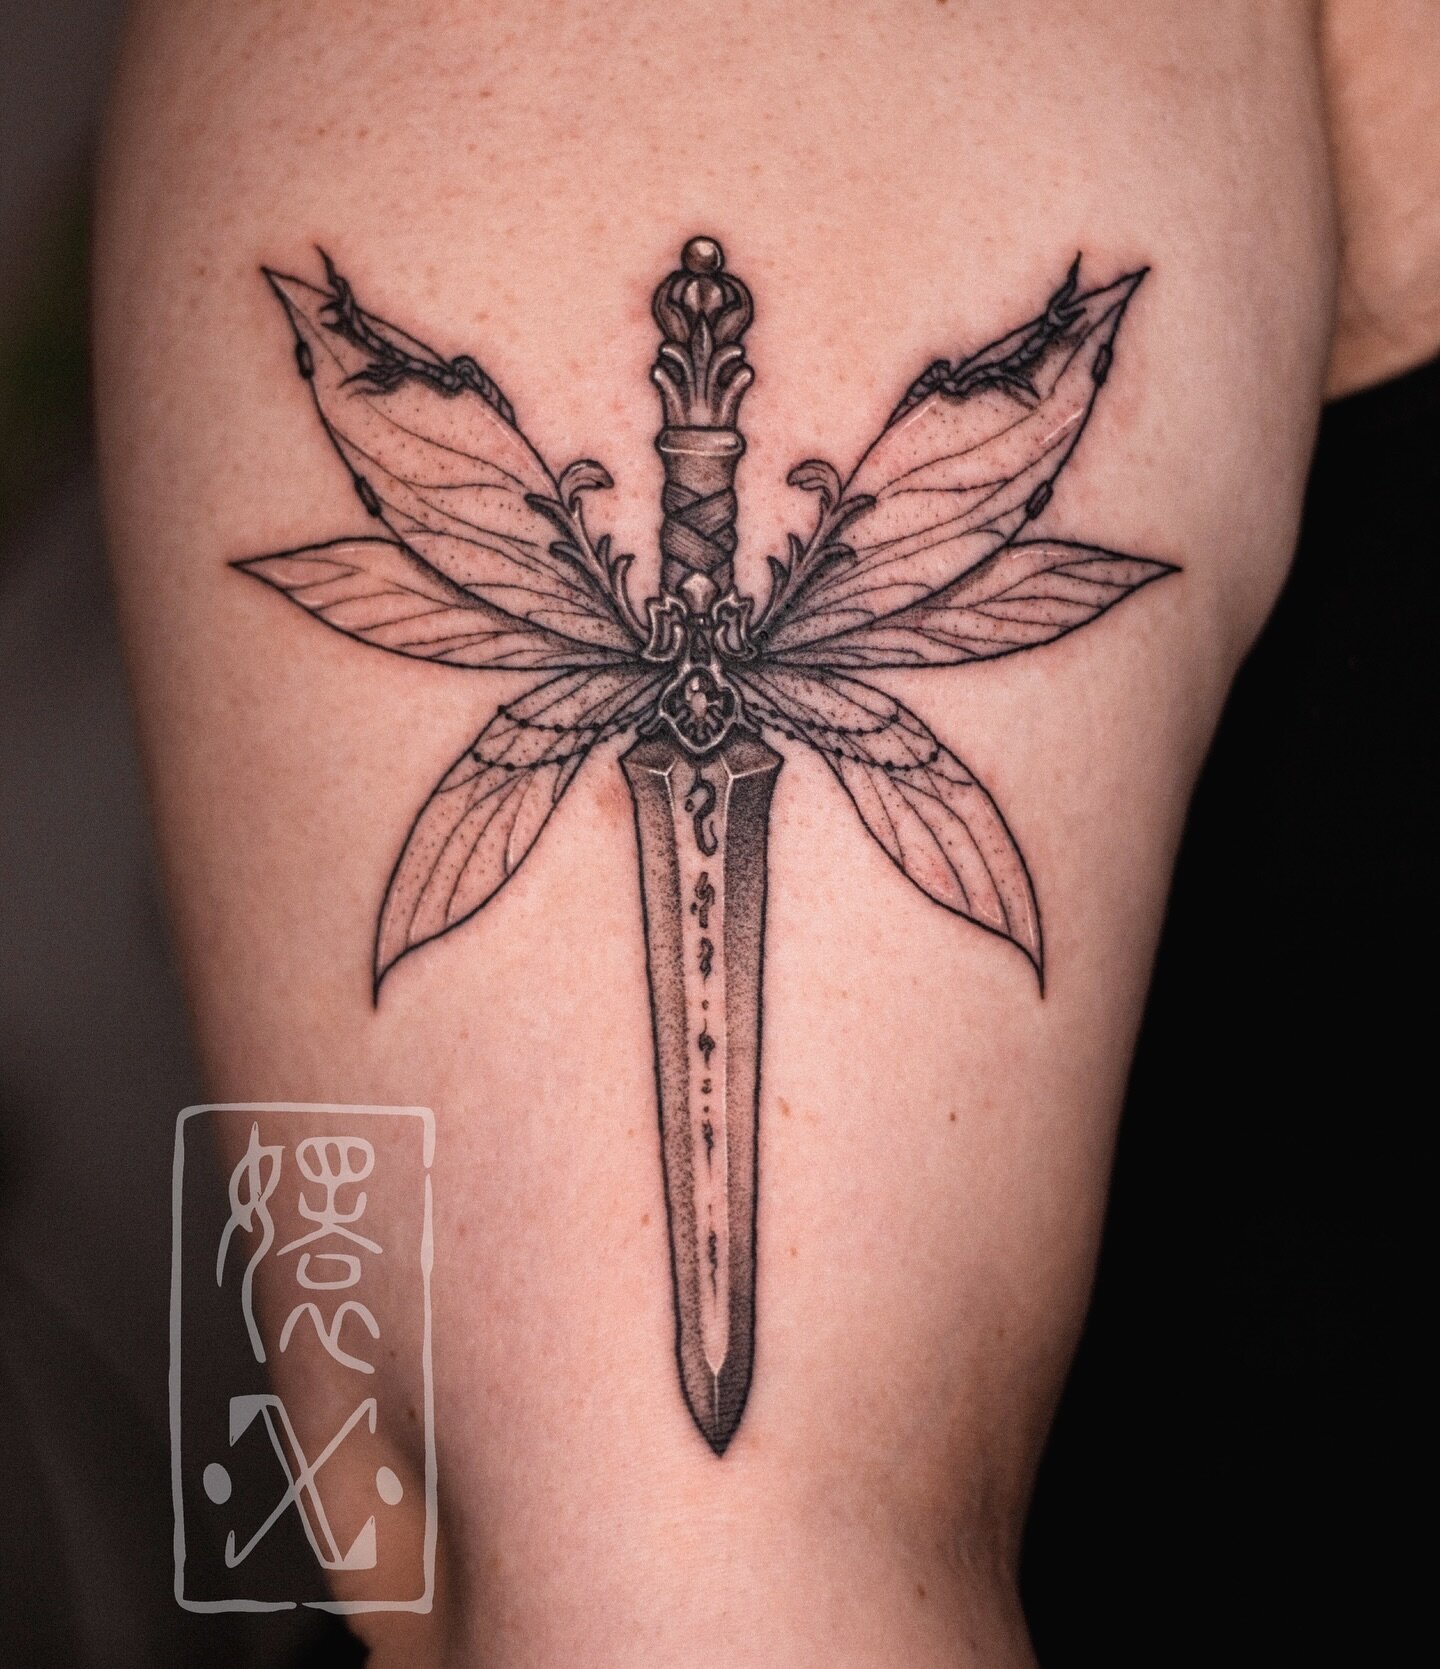 My fairy dagger flash design got adopted :3 thank you so much 🥹 lemme make your fantasy dnd and video game weapons come to life 😈 

Done @cakeisalietattoo 🍰 ⁣
.⁣
.⁣
.⁣
.⁣
.⁣
#brooklyntattoo #nyctattoo #nyctattooartist #newyorktattoo #fantasyart #b